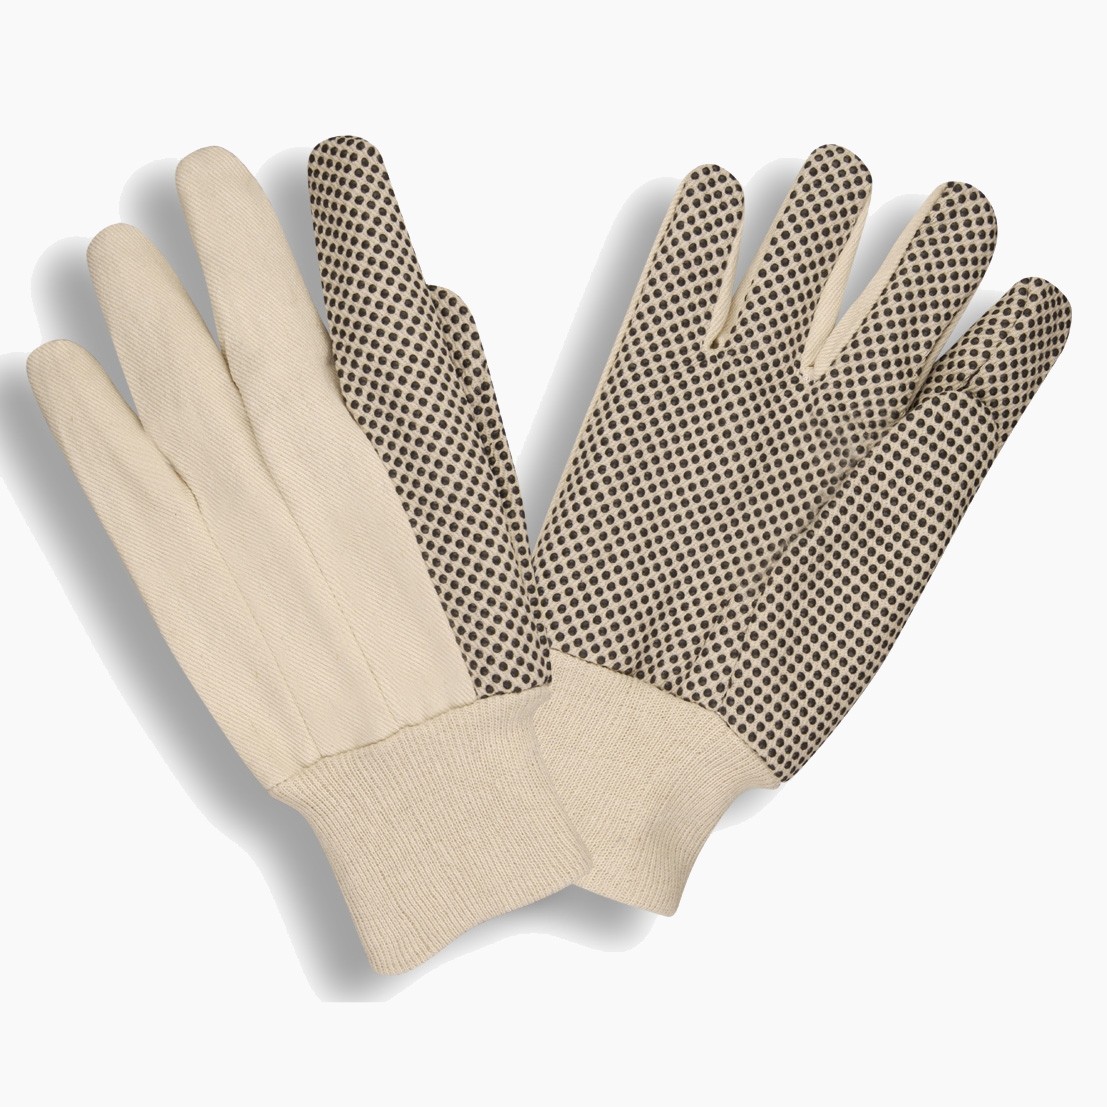 12 Pairs Large Cotton Canvas Knit Protection Work Gloves with Black PVC  Dots for Hand Grip Painter Mechanic Gardening Glove for Men Women Beige 24  Count Bulk 